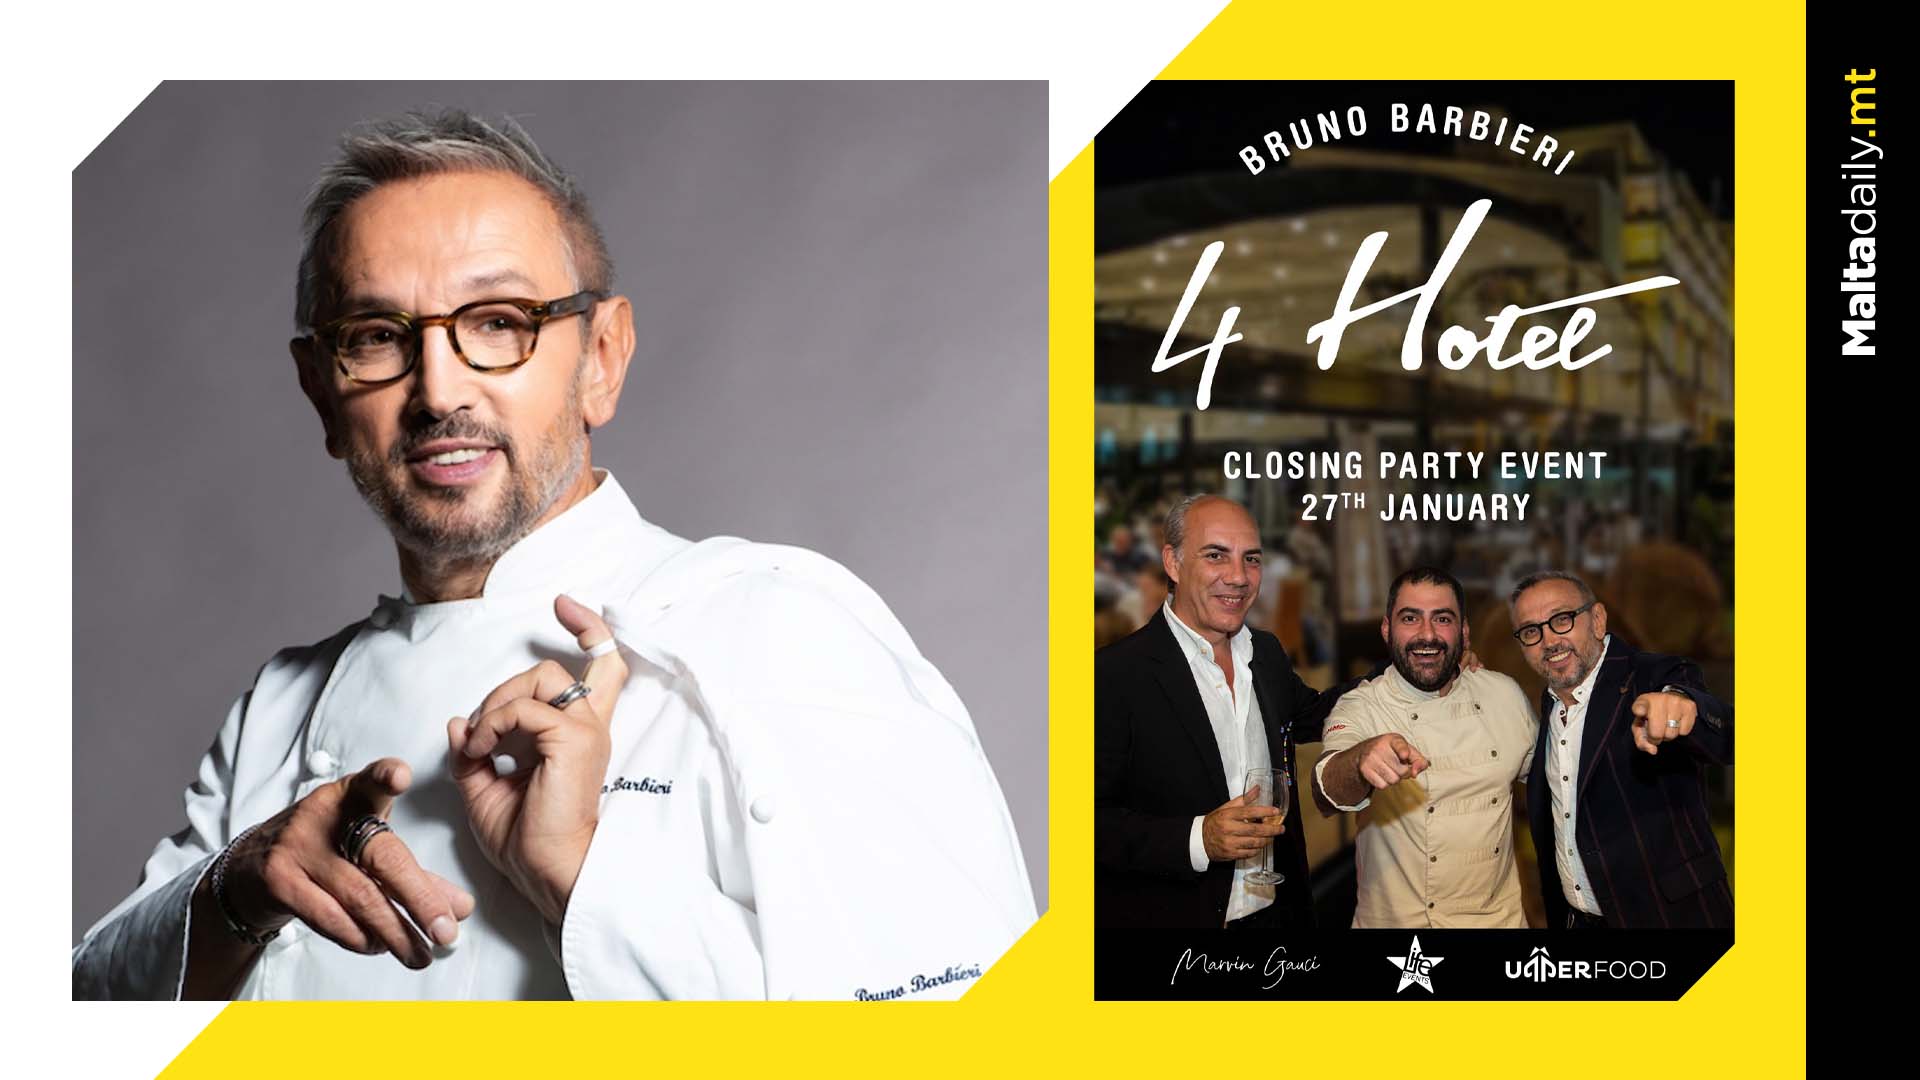 This is your chance to meet renowned Italian chef Bruno Barbieri